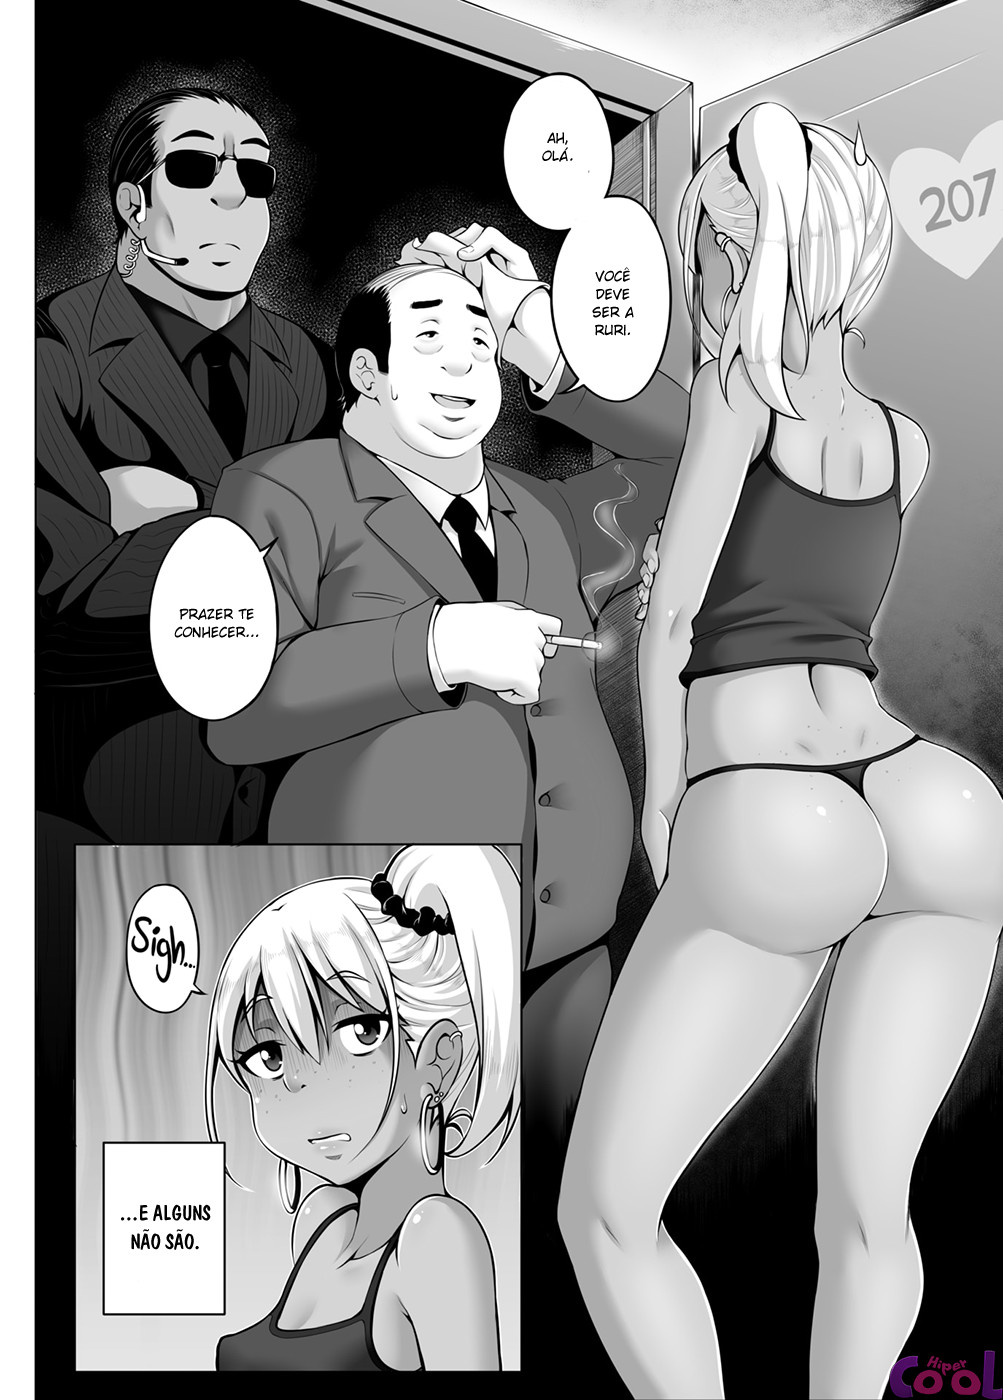 shady-dealings-chapter-07-page-07.jpg